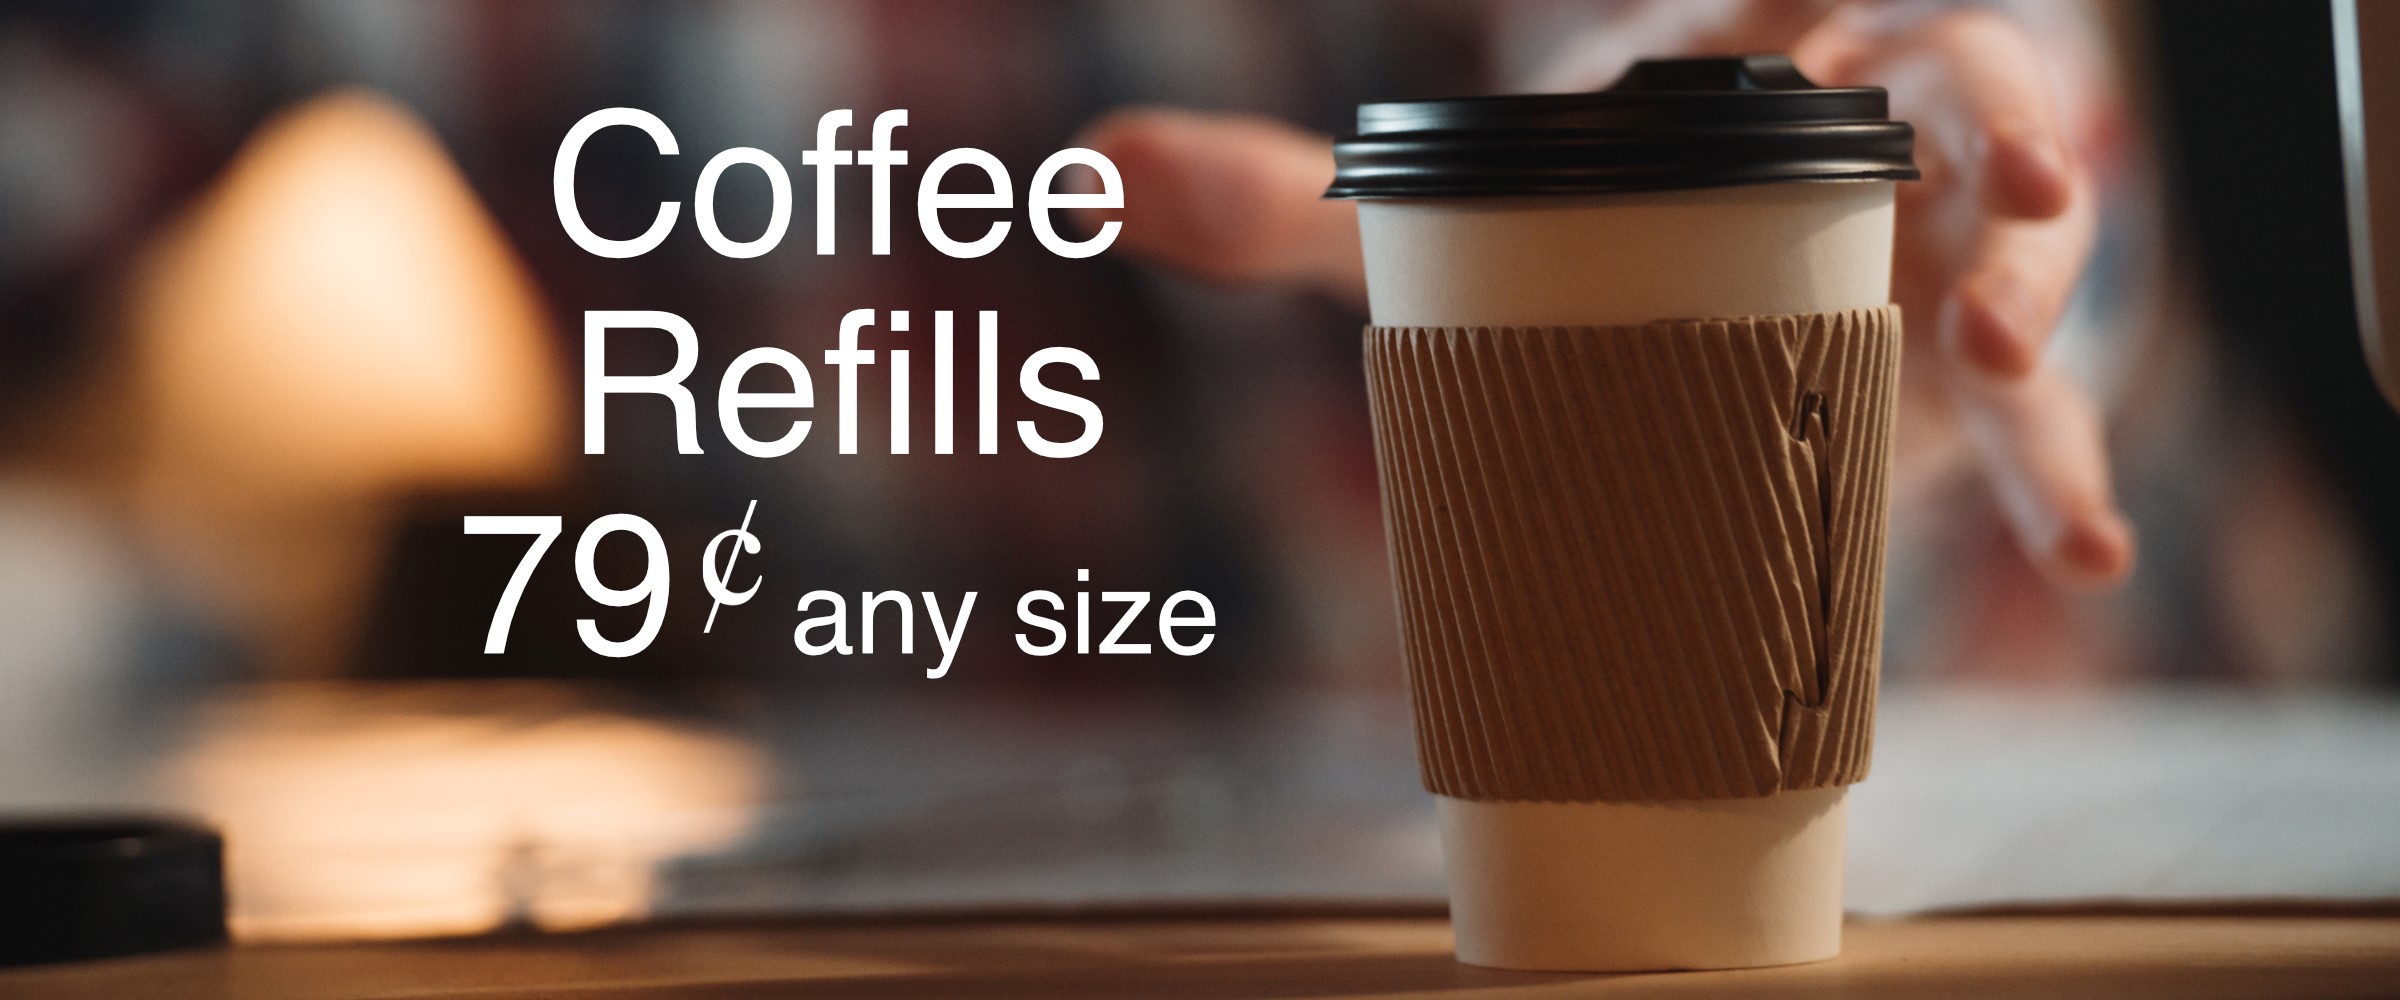 Coffee Refills 79¢ any size